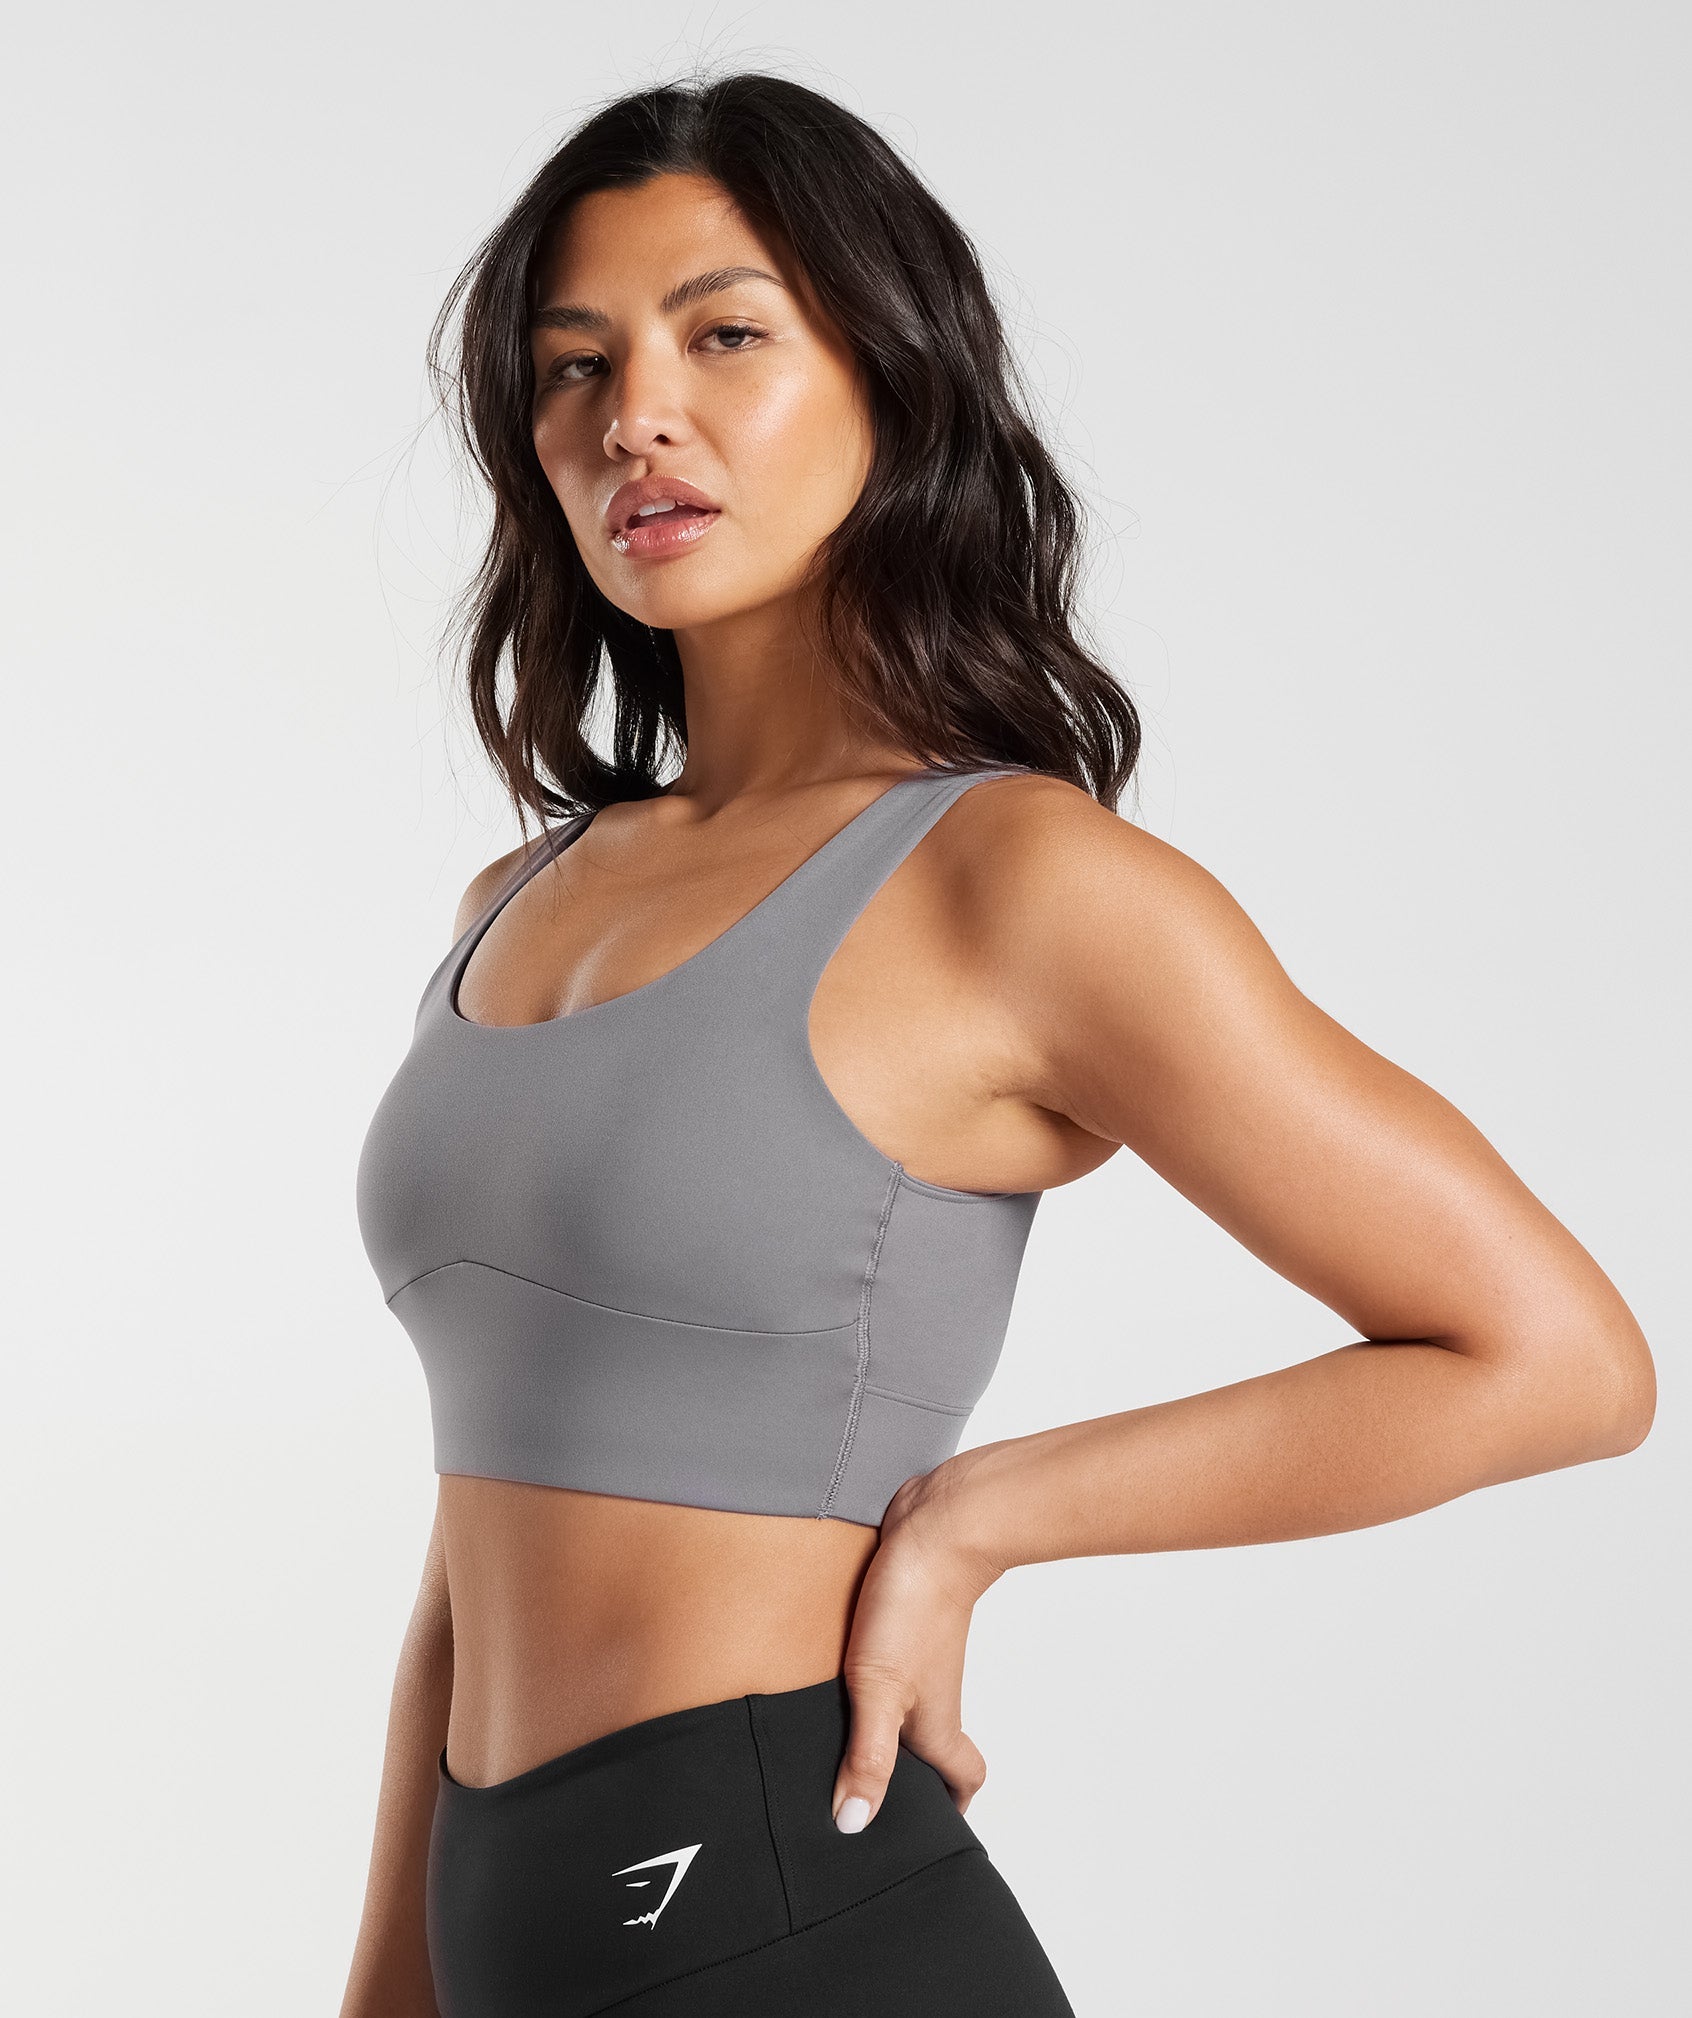 Lavento Women's Longline Sports Bra - Crop Tank Top with Built in Bra  Gray Size 8 - $17 (66% Off Retail) - From Megan